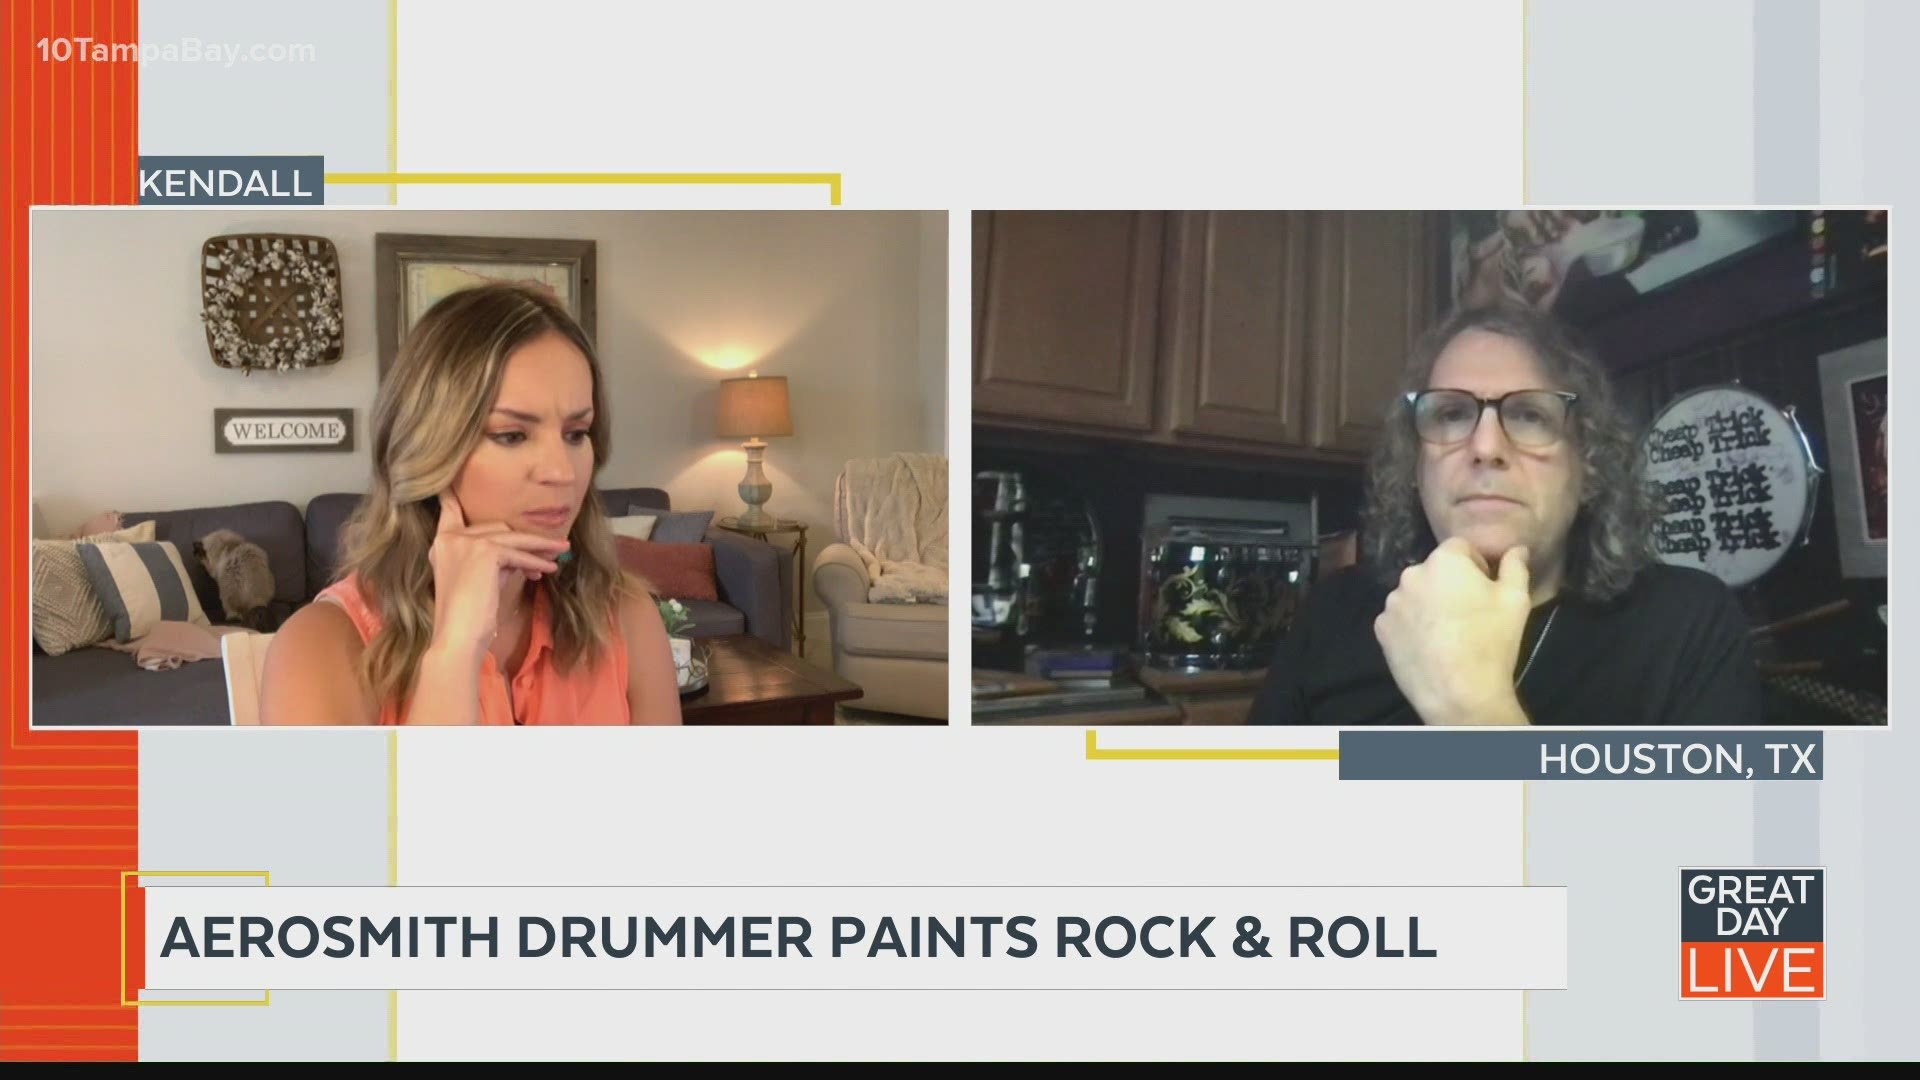 Aerosmith drummer who paints rock & roll makes a stop in Tampa